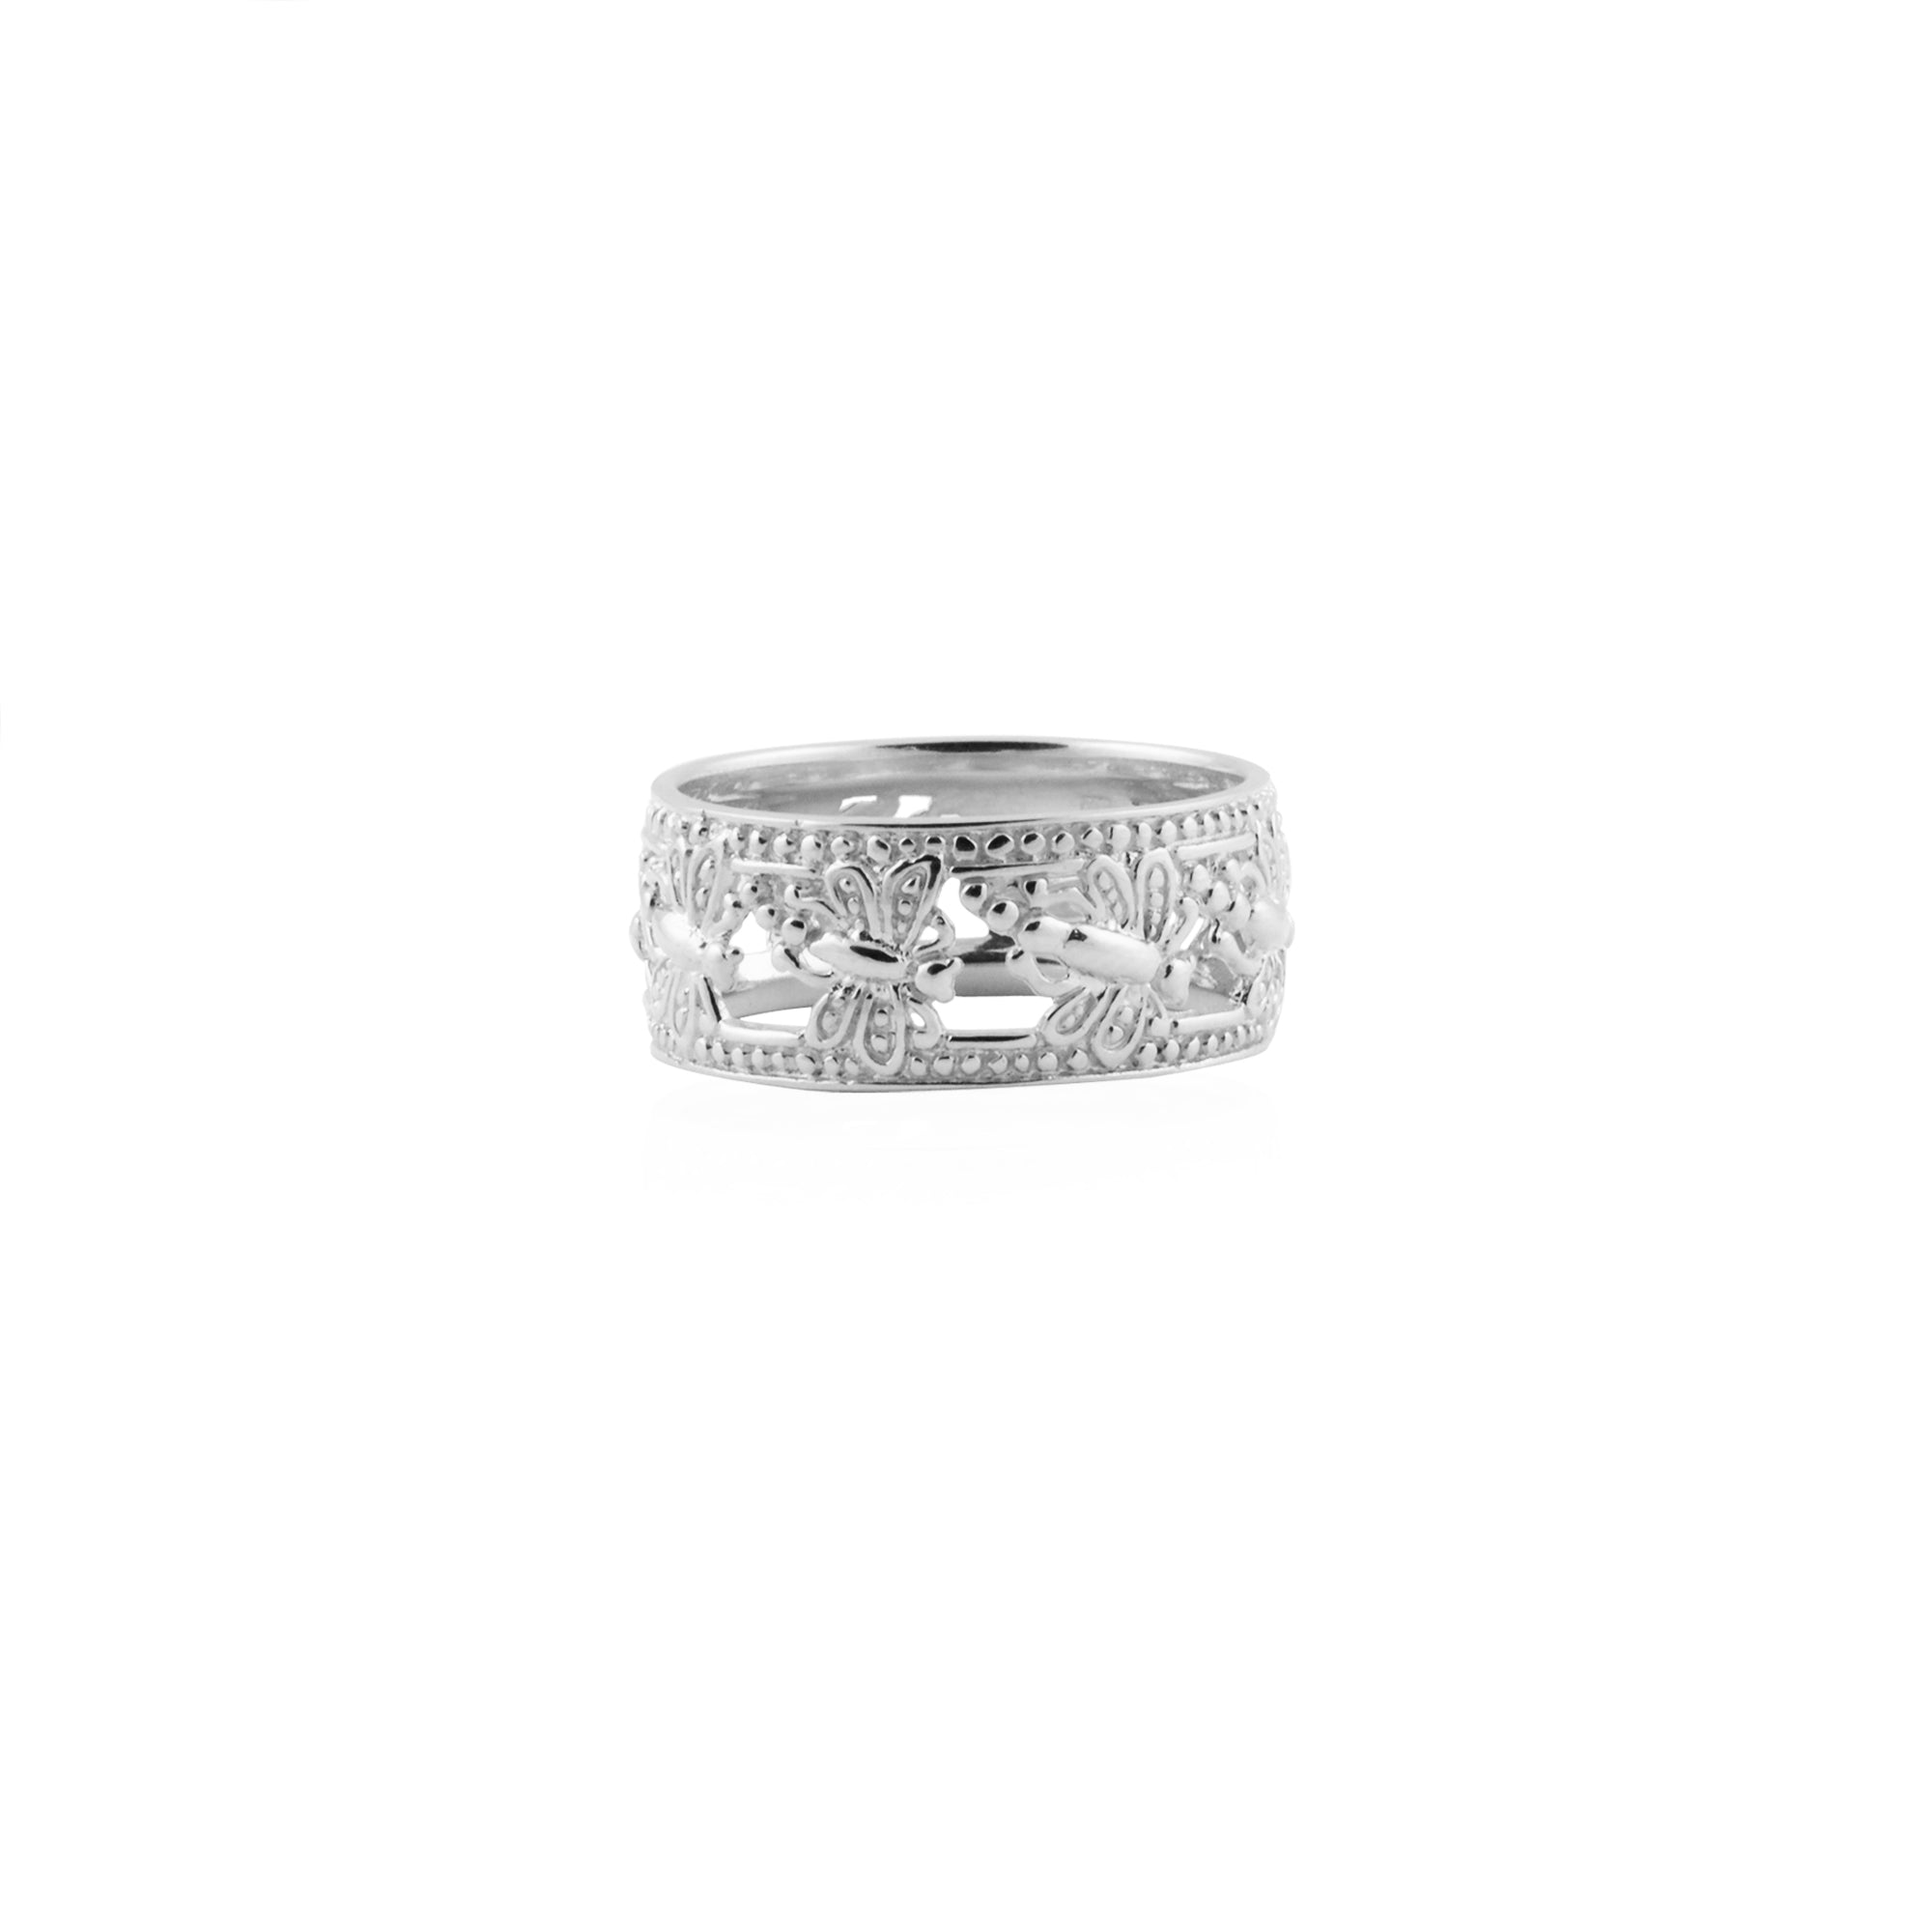 Cincin Besar Capung Silver Band Ring Capung Collections Silver